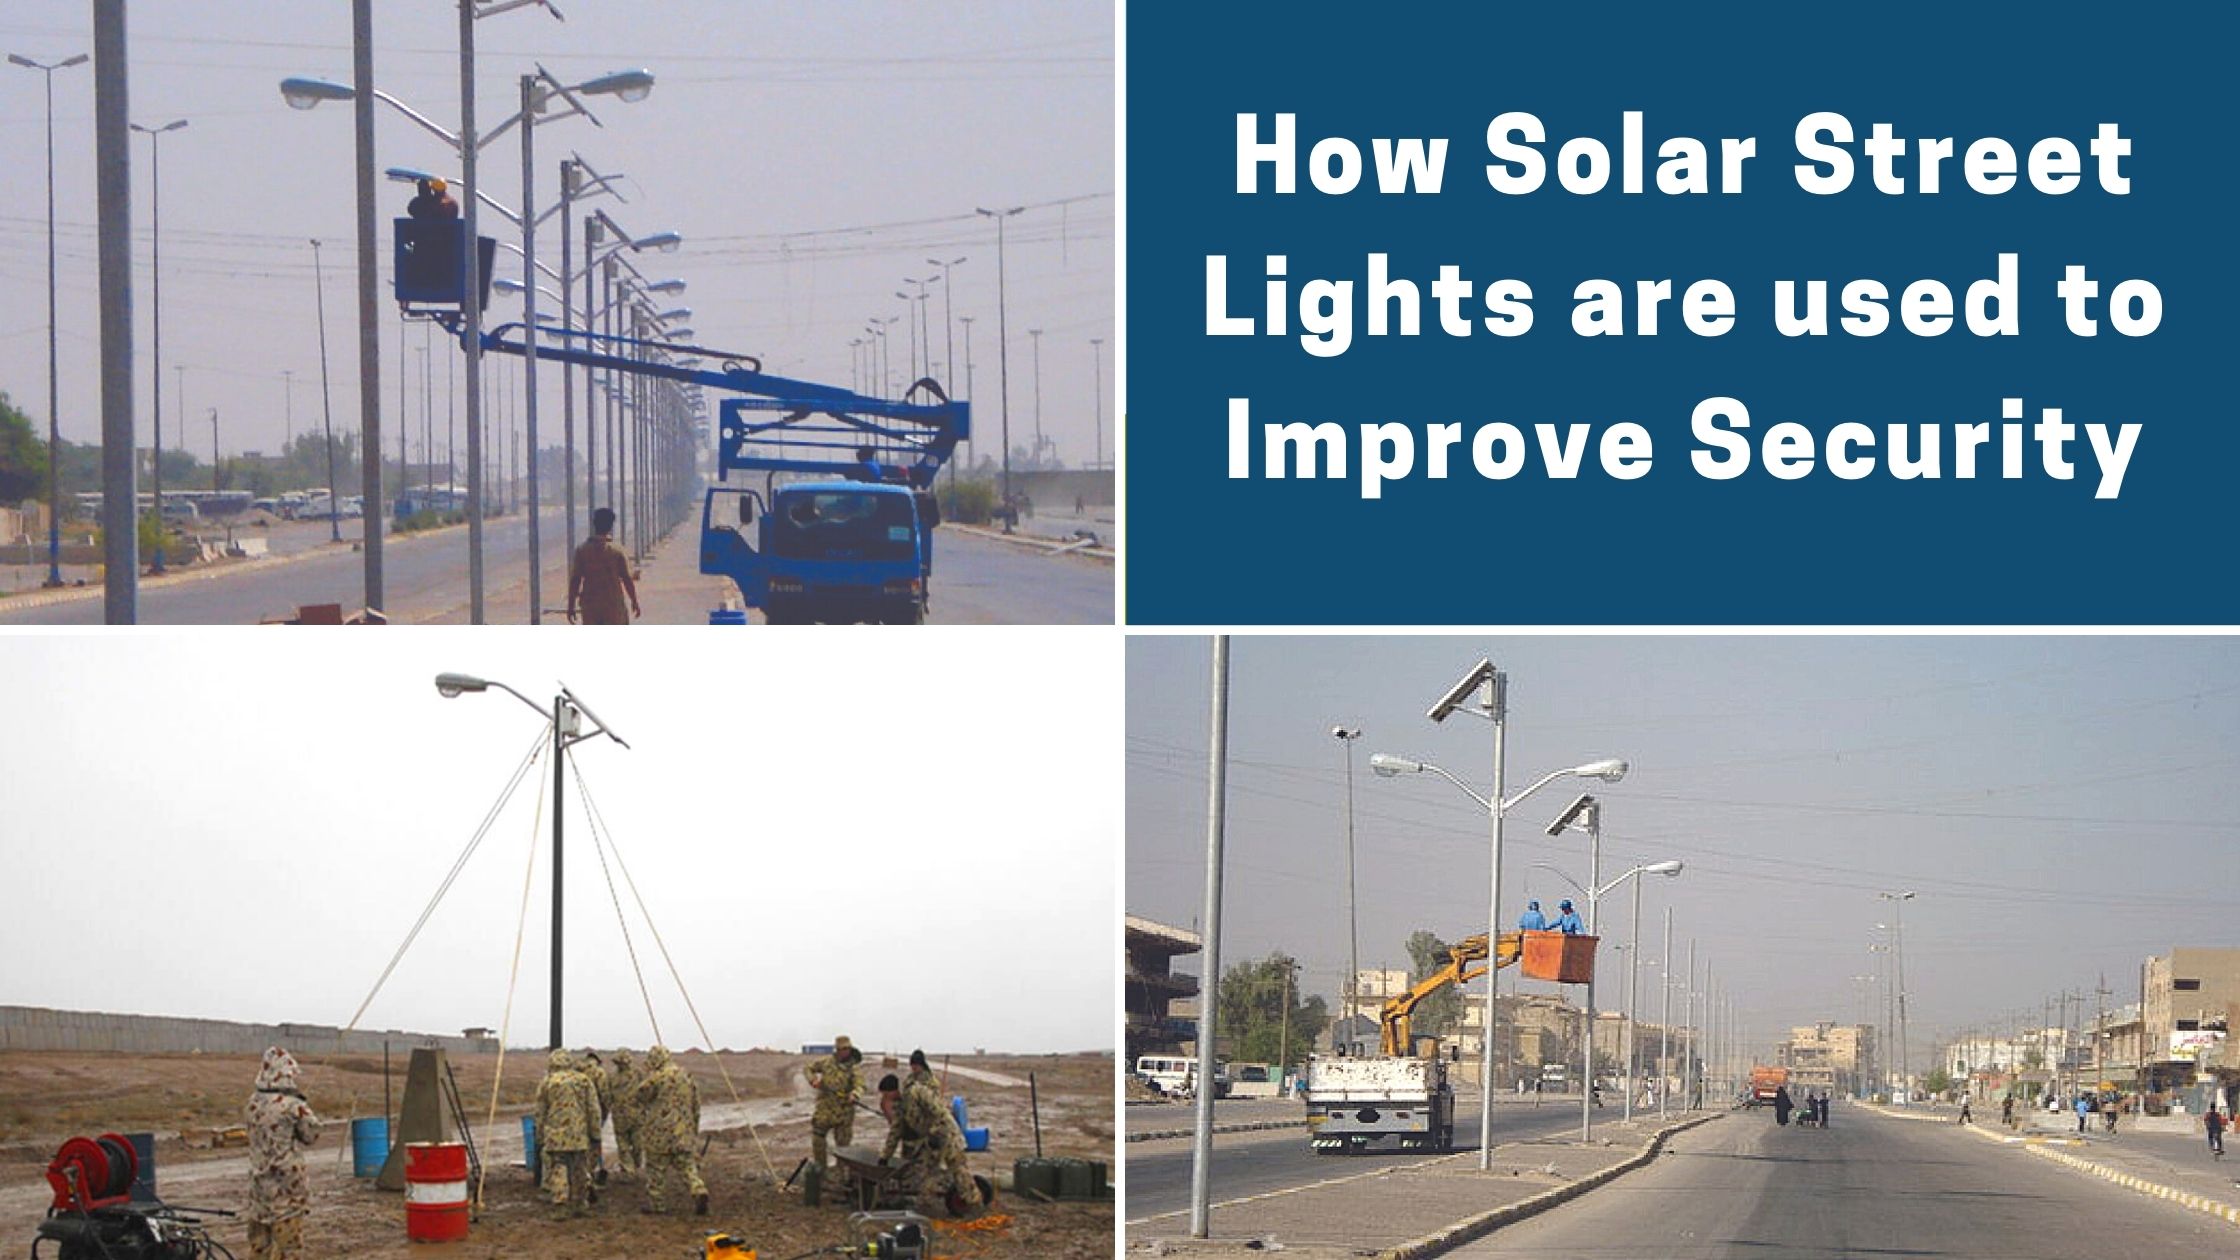 How Solar Street Lights are used to Improve Security